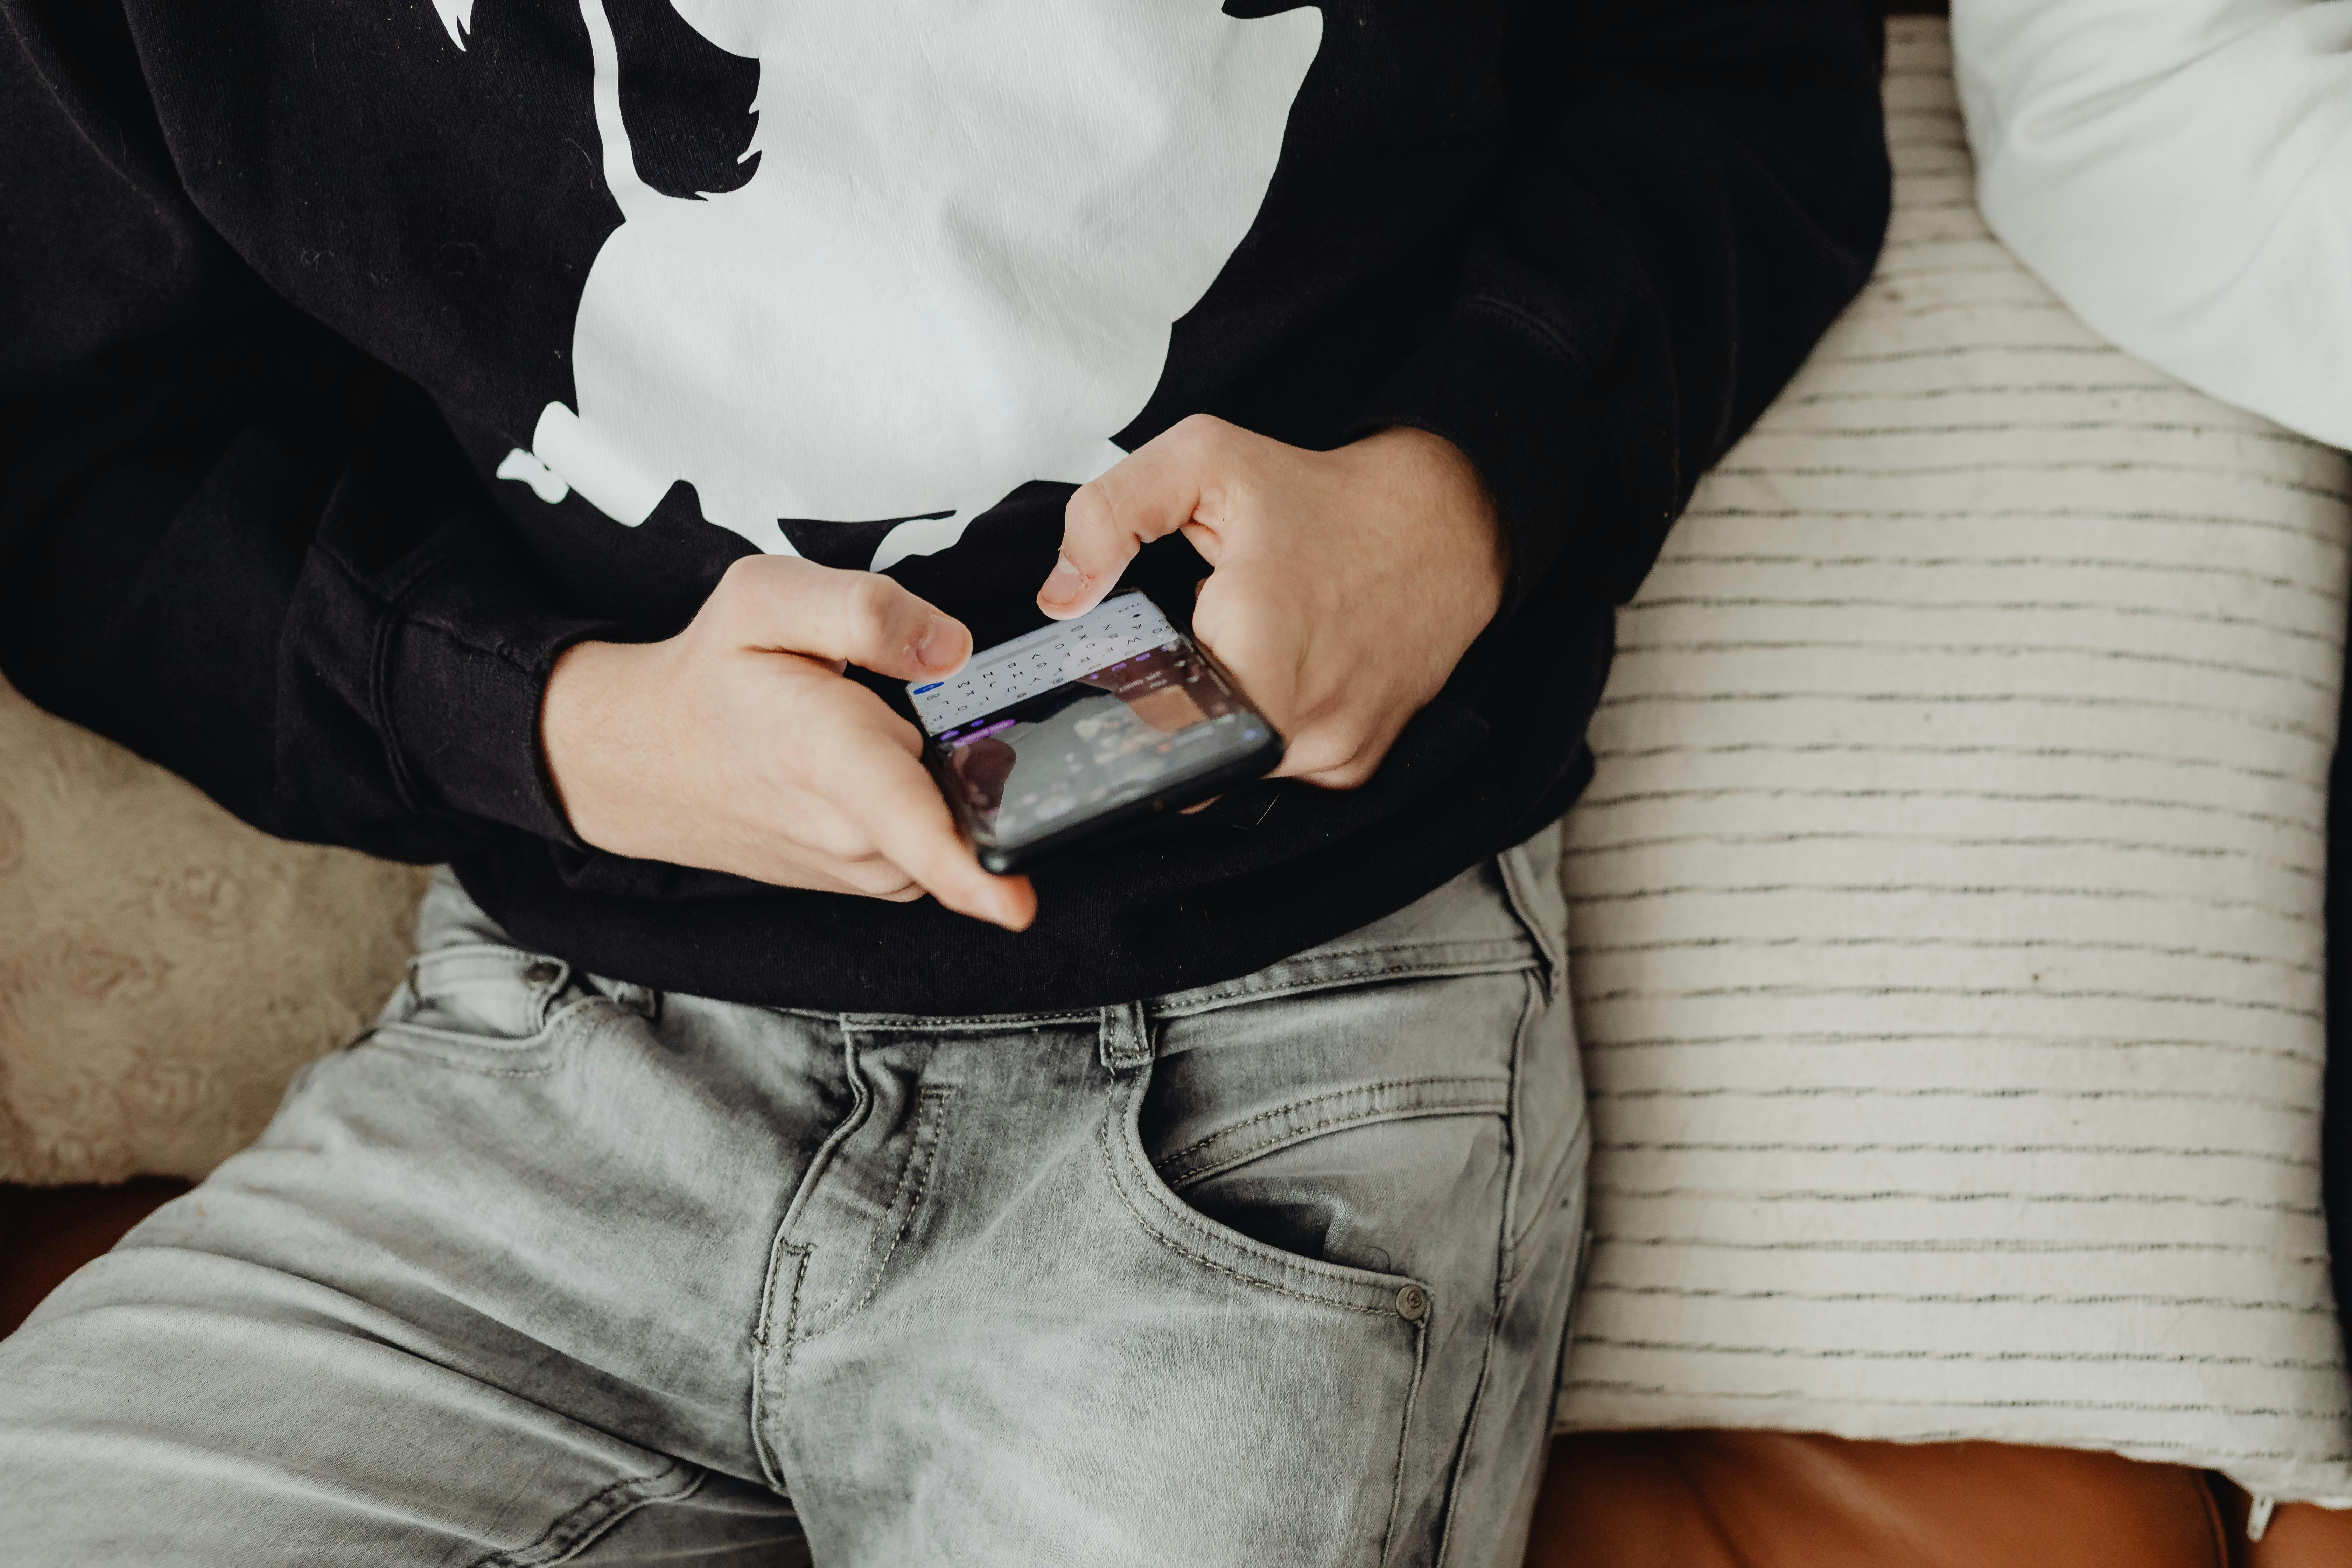 A boy using his phone while sitting | Source: Pexels